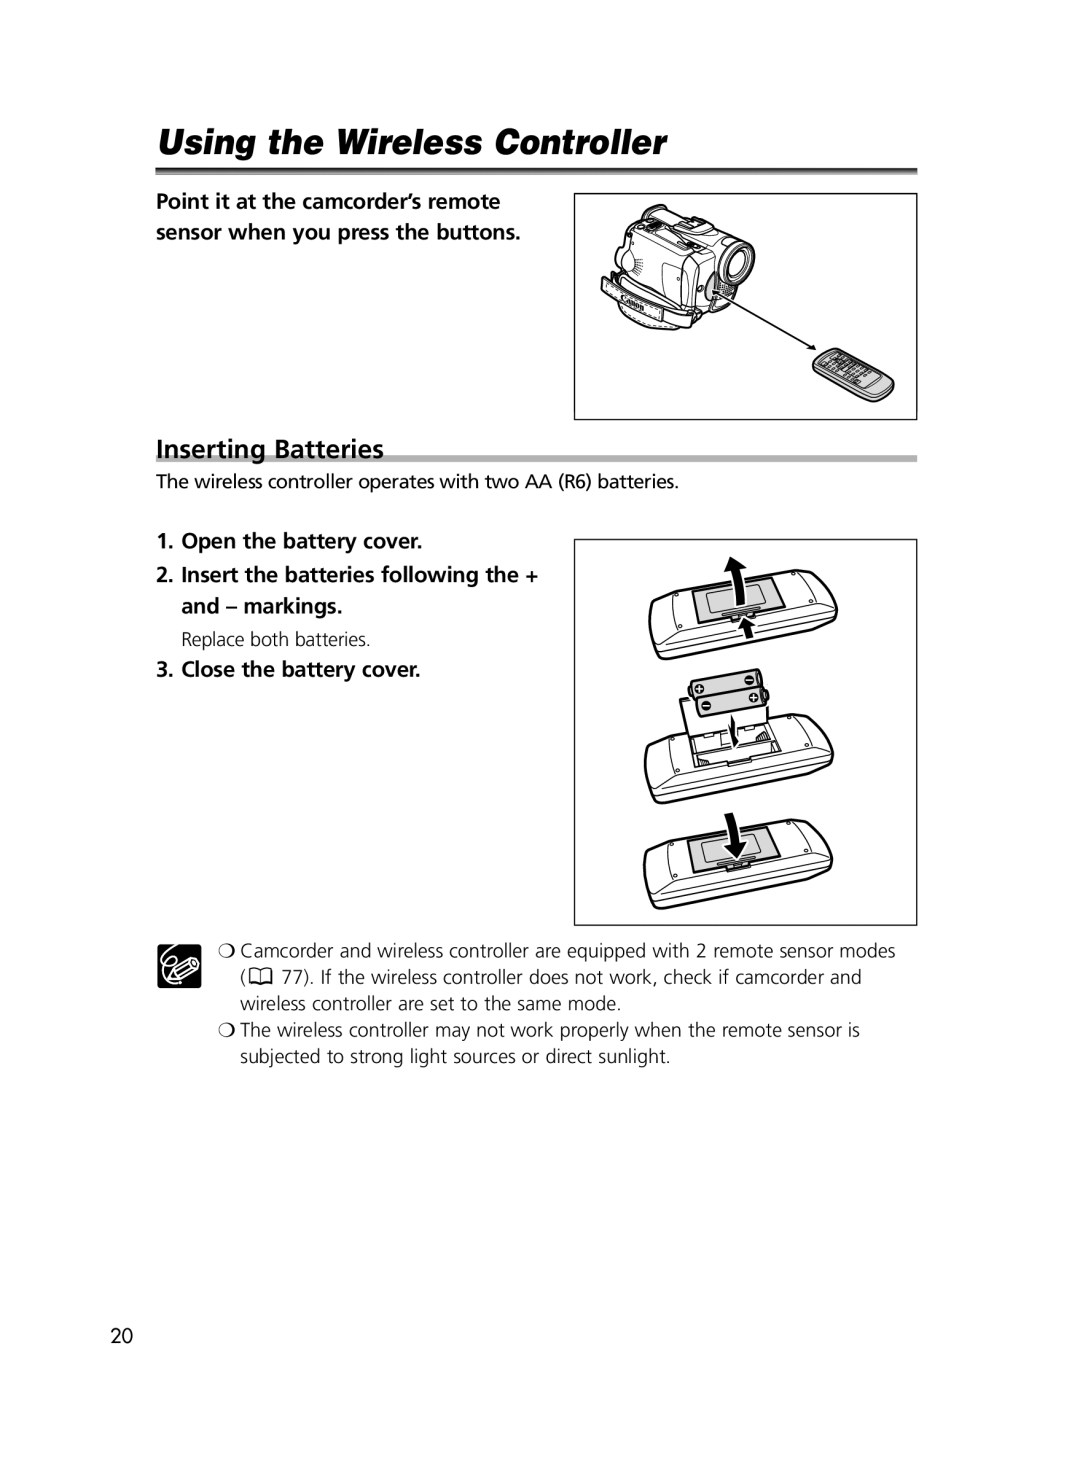 Canon 60, 65 instruction manual Using the Wireless Controller, Inserting Batteries, and - markings, Close the battery cover 